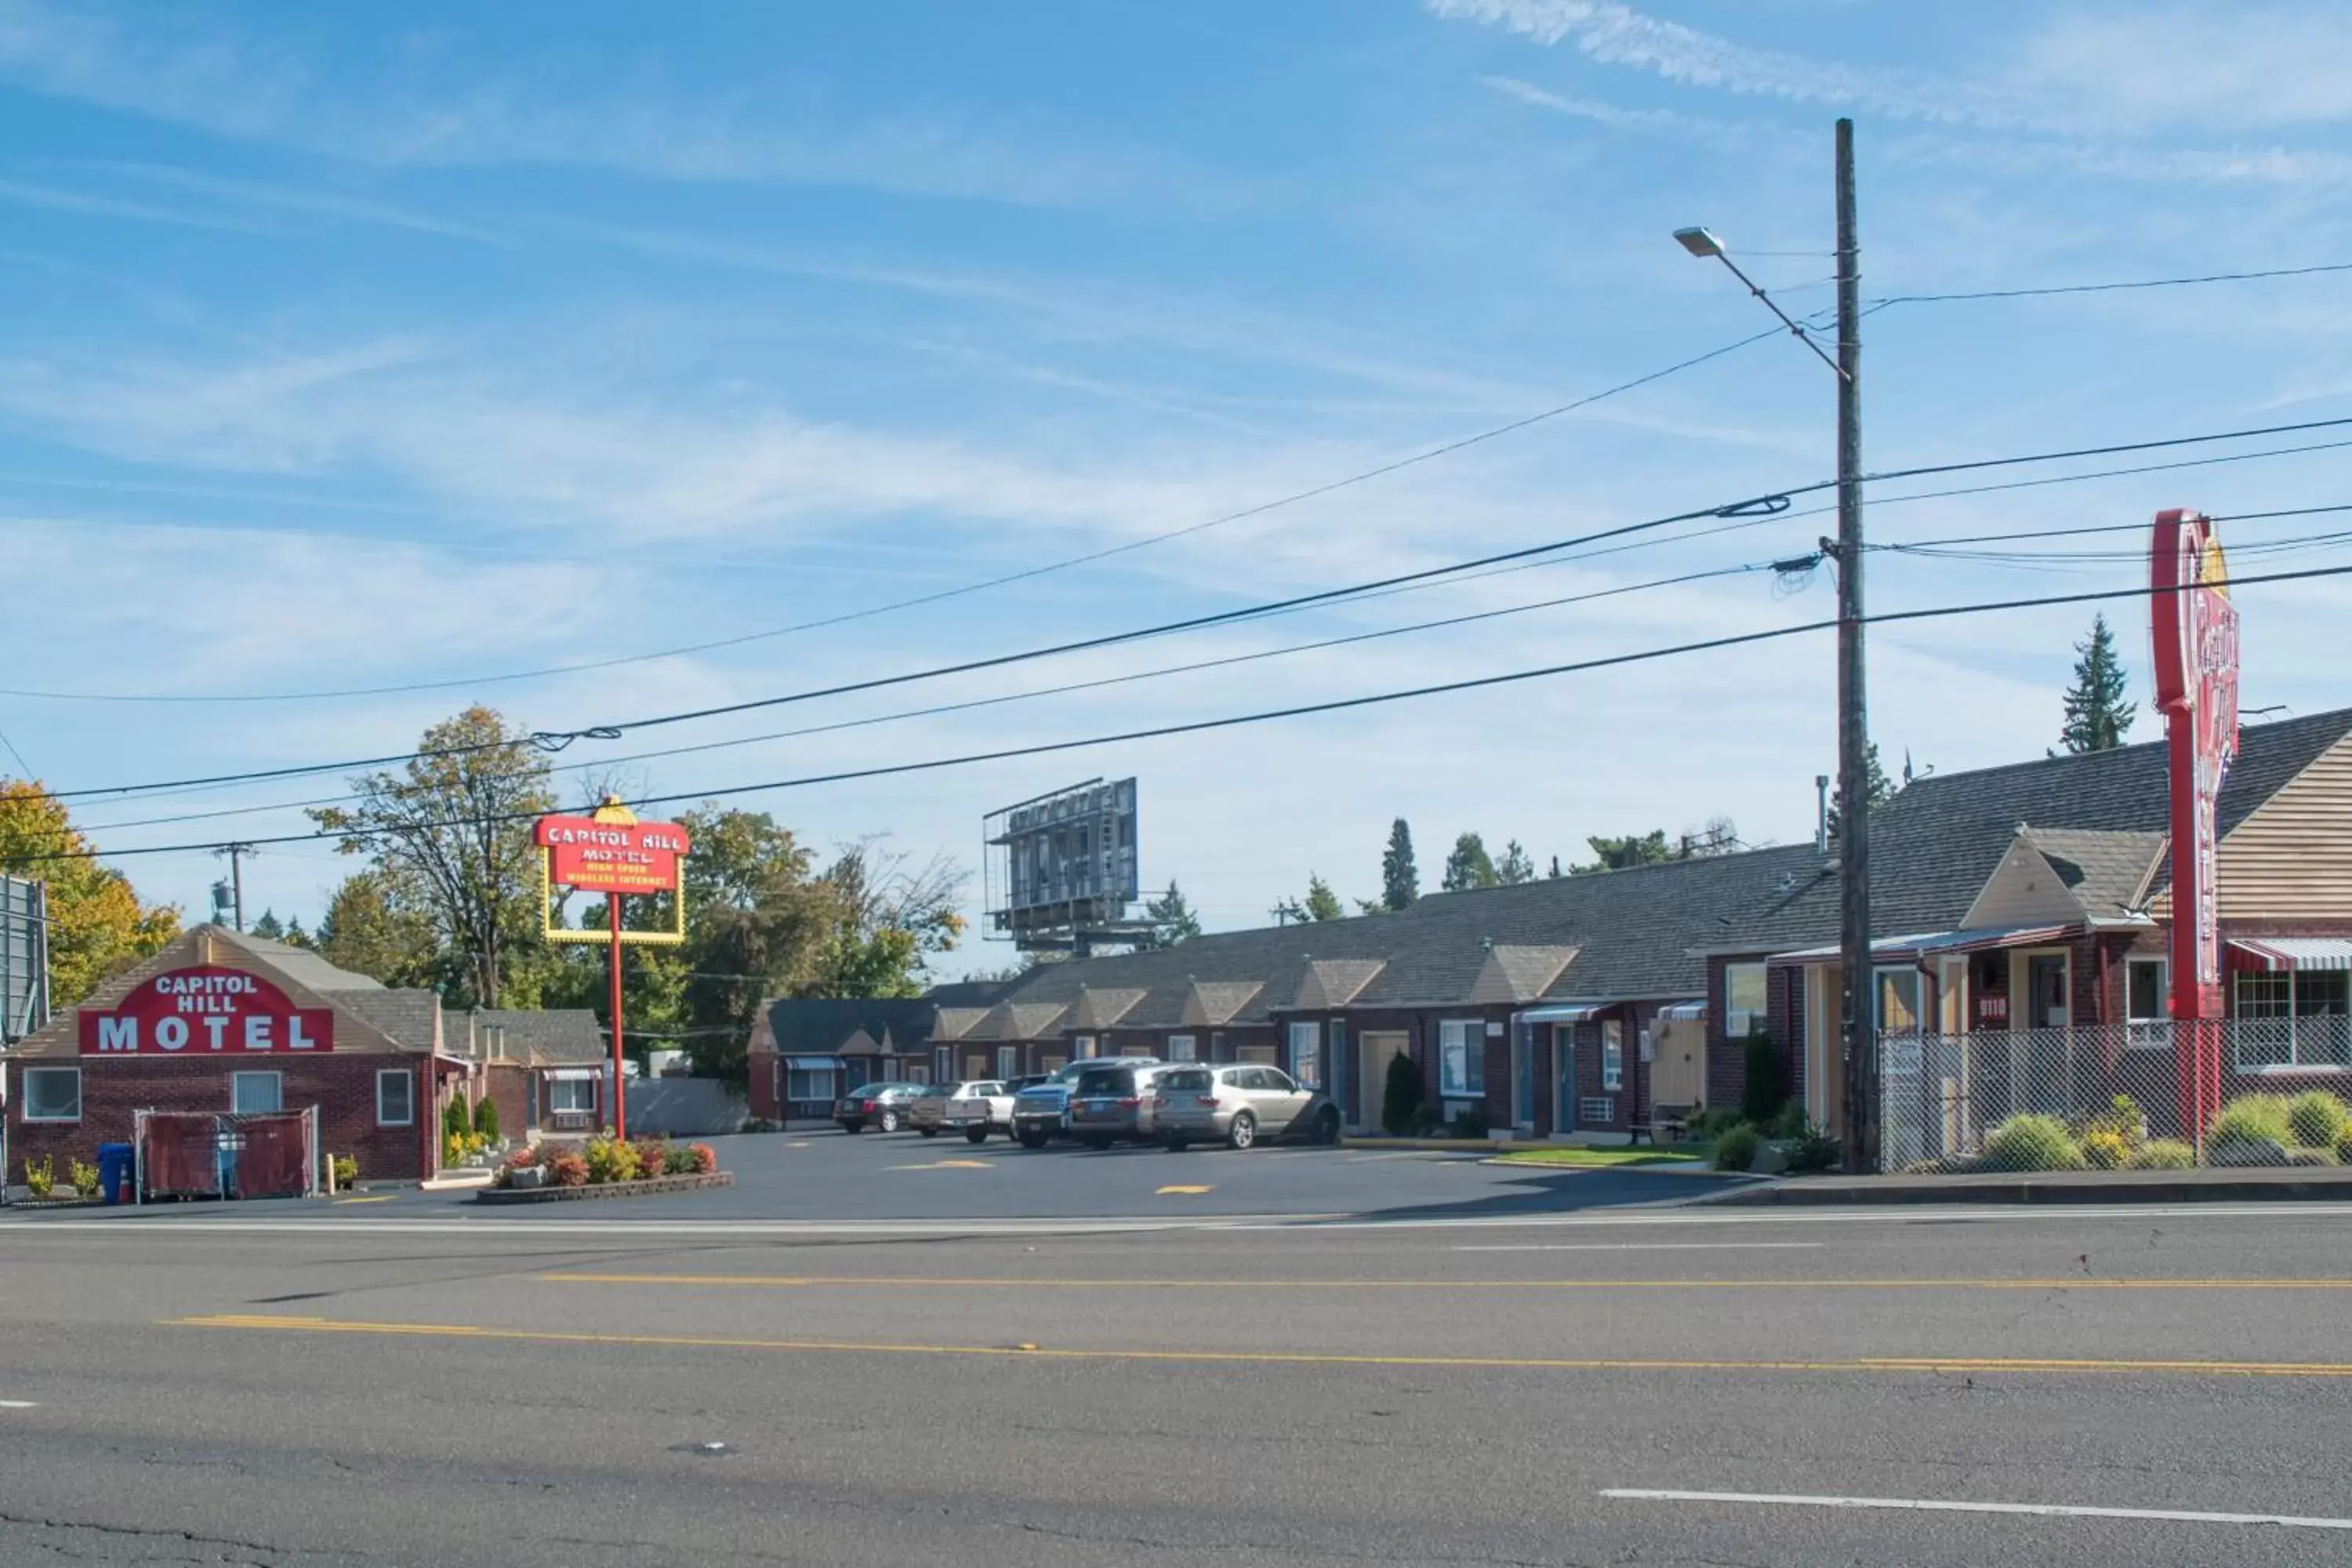 Property building, Neighborhood in Capitol Hill Motel